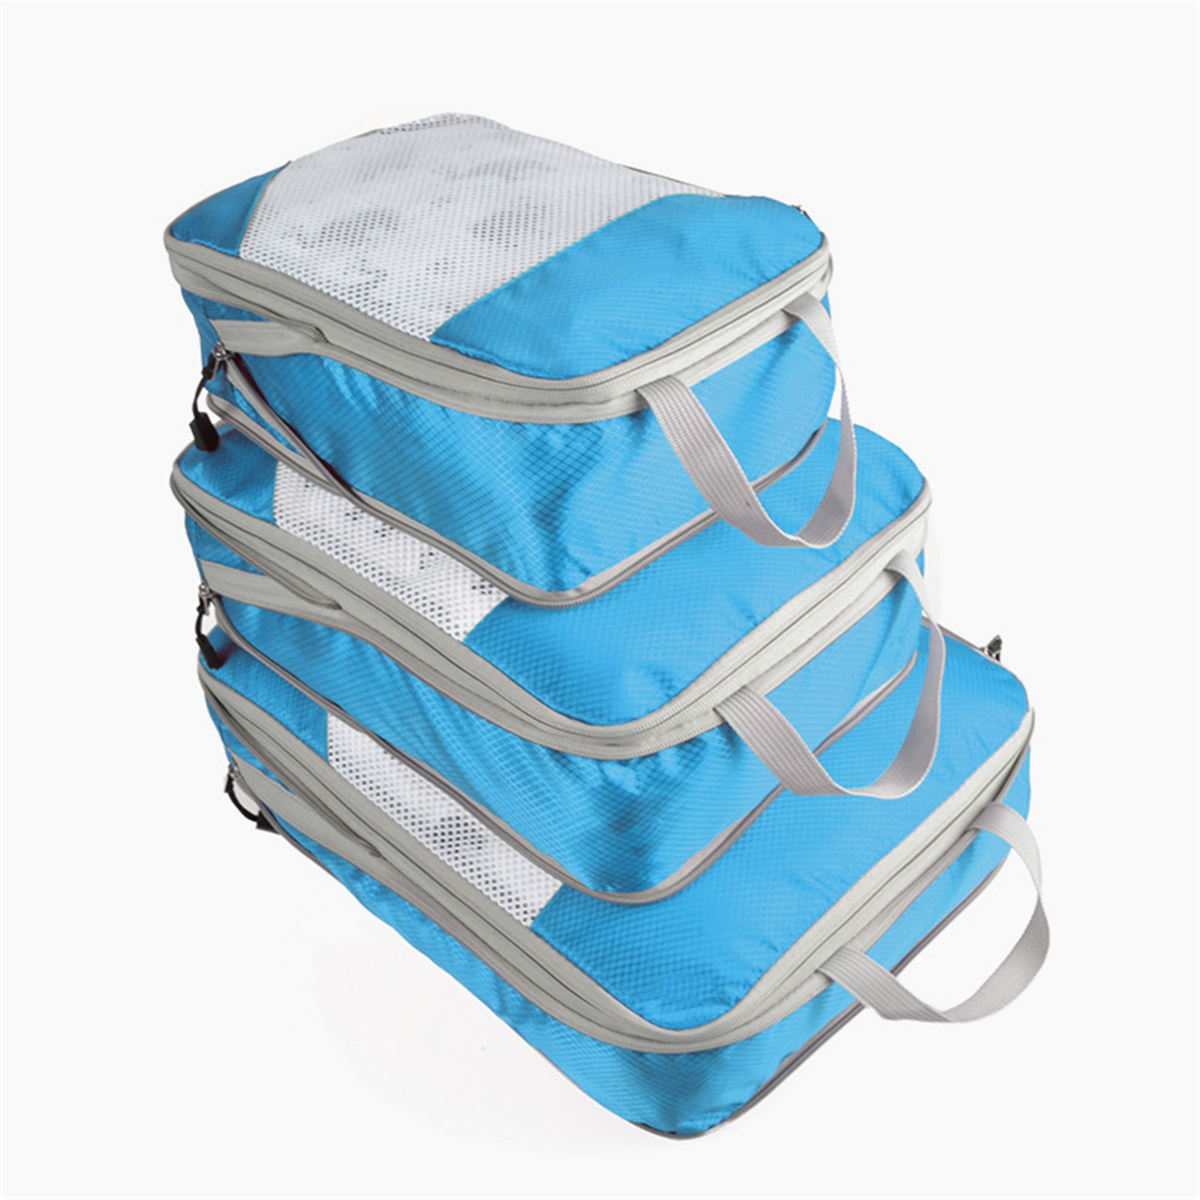 3PCS-Waterproof-Packing-Bags-Outdoor-Traveling-Luggage-Storage-Bag-Clothes-Bags-1603720-7